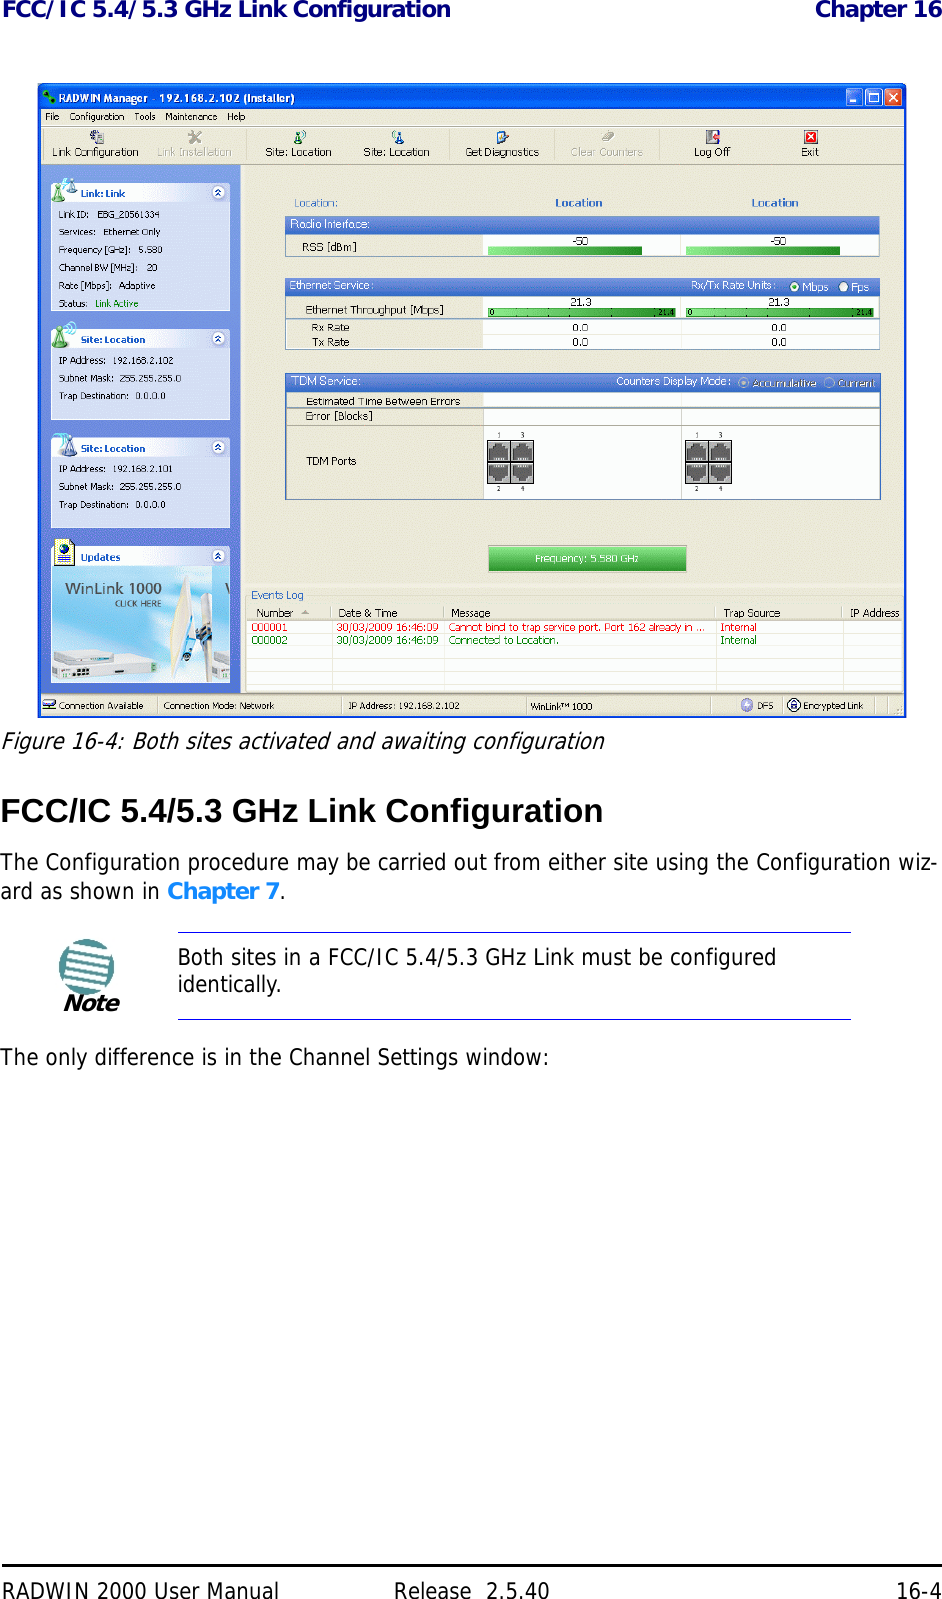 FCC/IC 5.4/5.3 GHz Link Configuration Chapter 16RADWIN 2000 User Manual Release  2.5.40 16-4Figure 16-4: Both sites activated and awaiting configurationFCC/IC 5.4/5.3 GHz Link ConfigurationThe Configuration procedure may be carried out from either site using the Configuration wiz-ard as shown in Chapter 7. The only difference is in the Channel Settings window:NoteBoth sites in a FCC/IC 5.4/5.3 GHz Link must be configured identically.